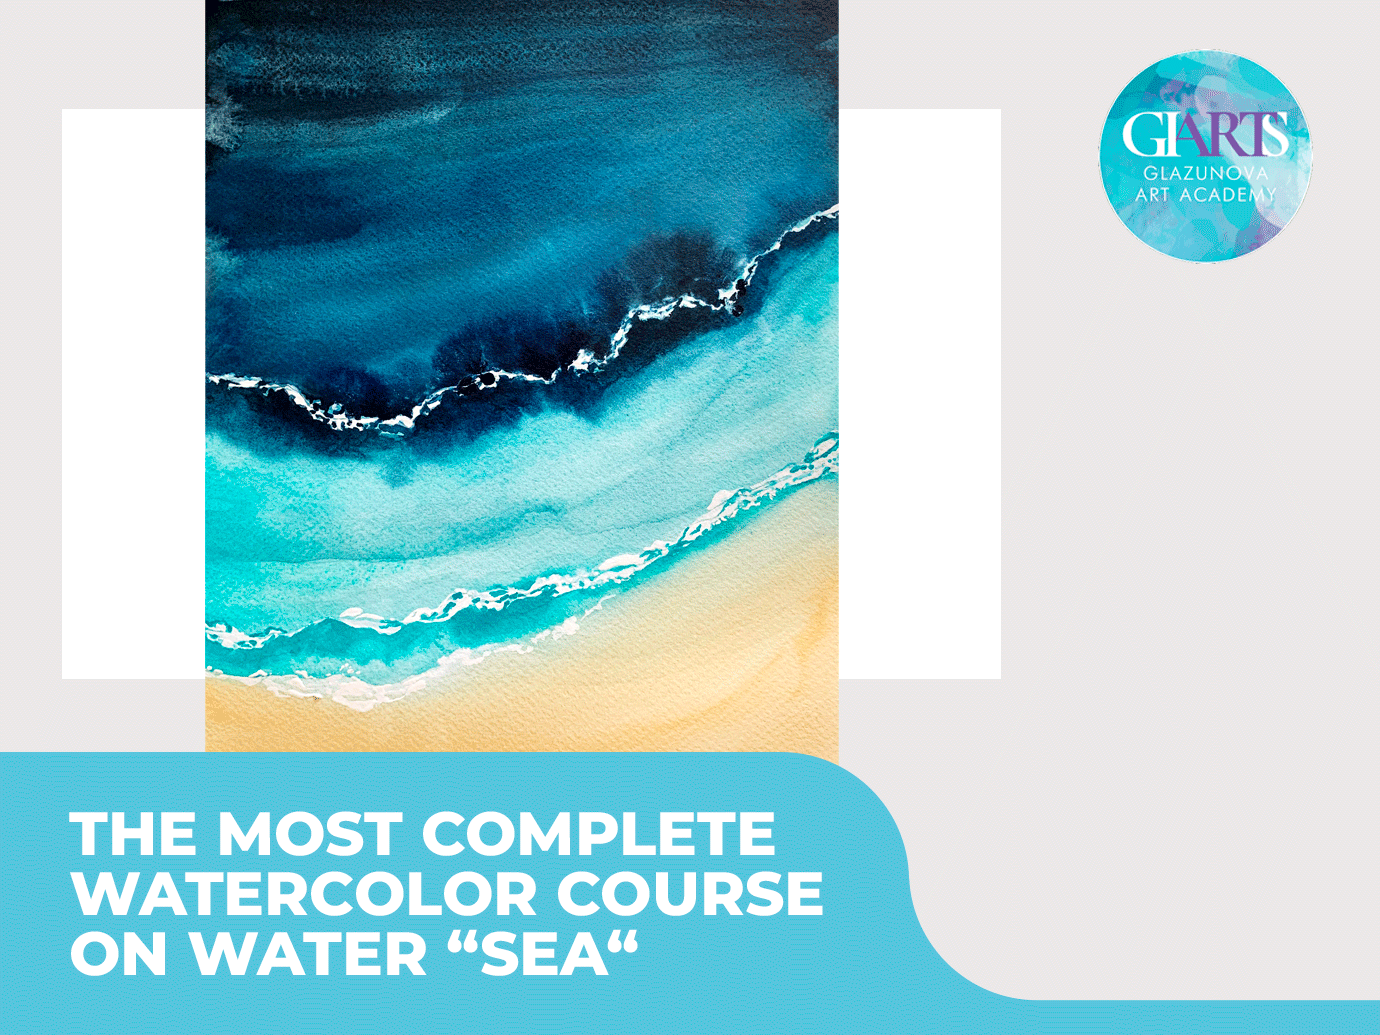 The most complete watercolor course on water “Sea“